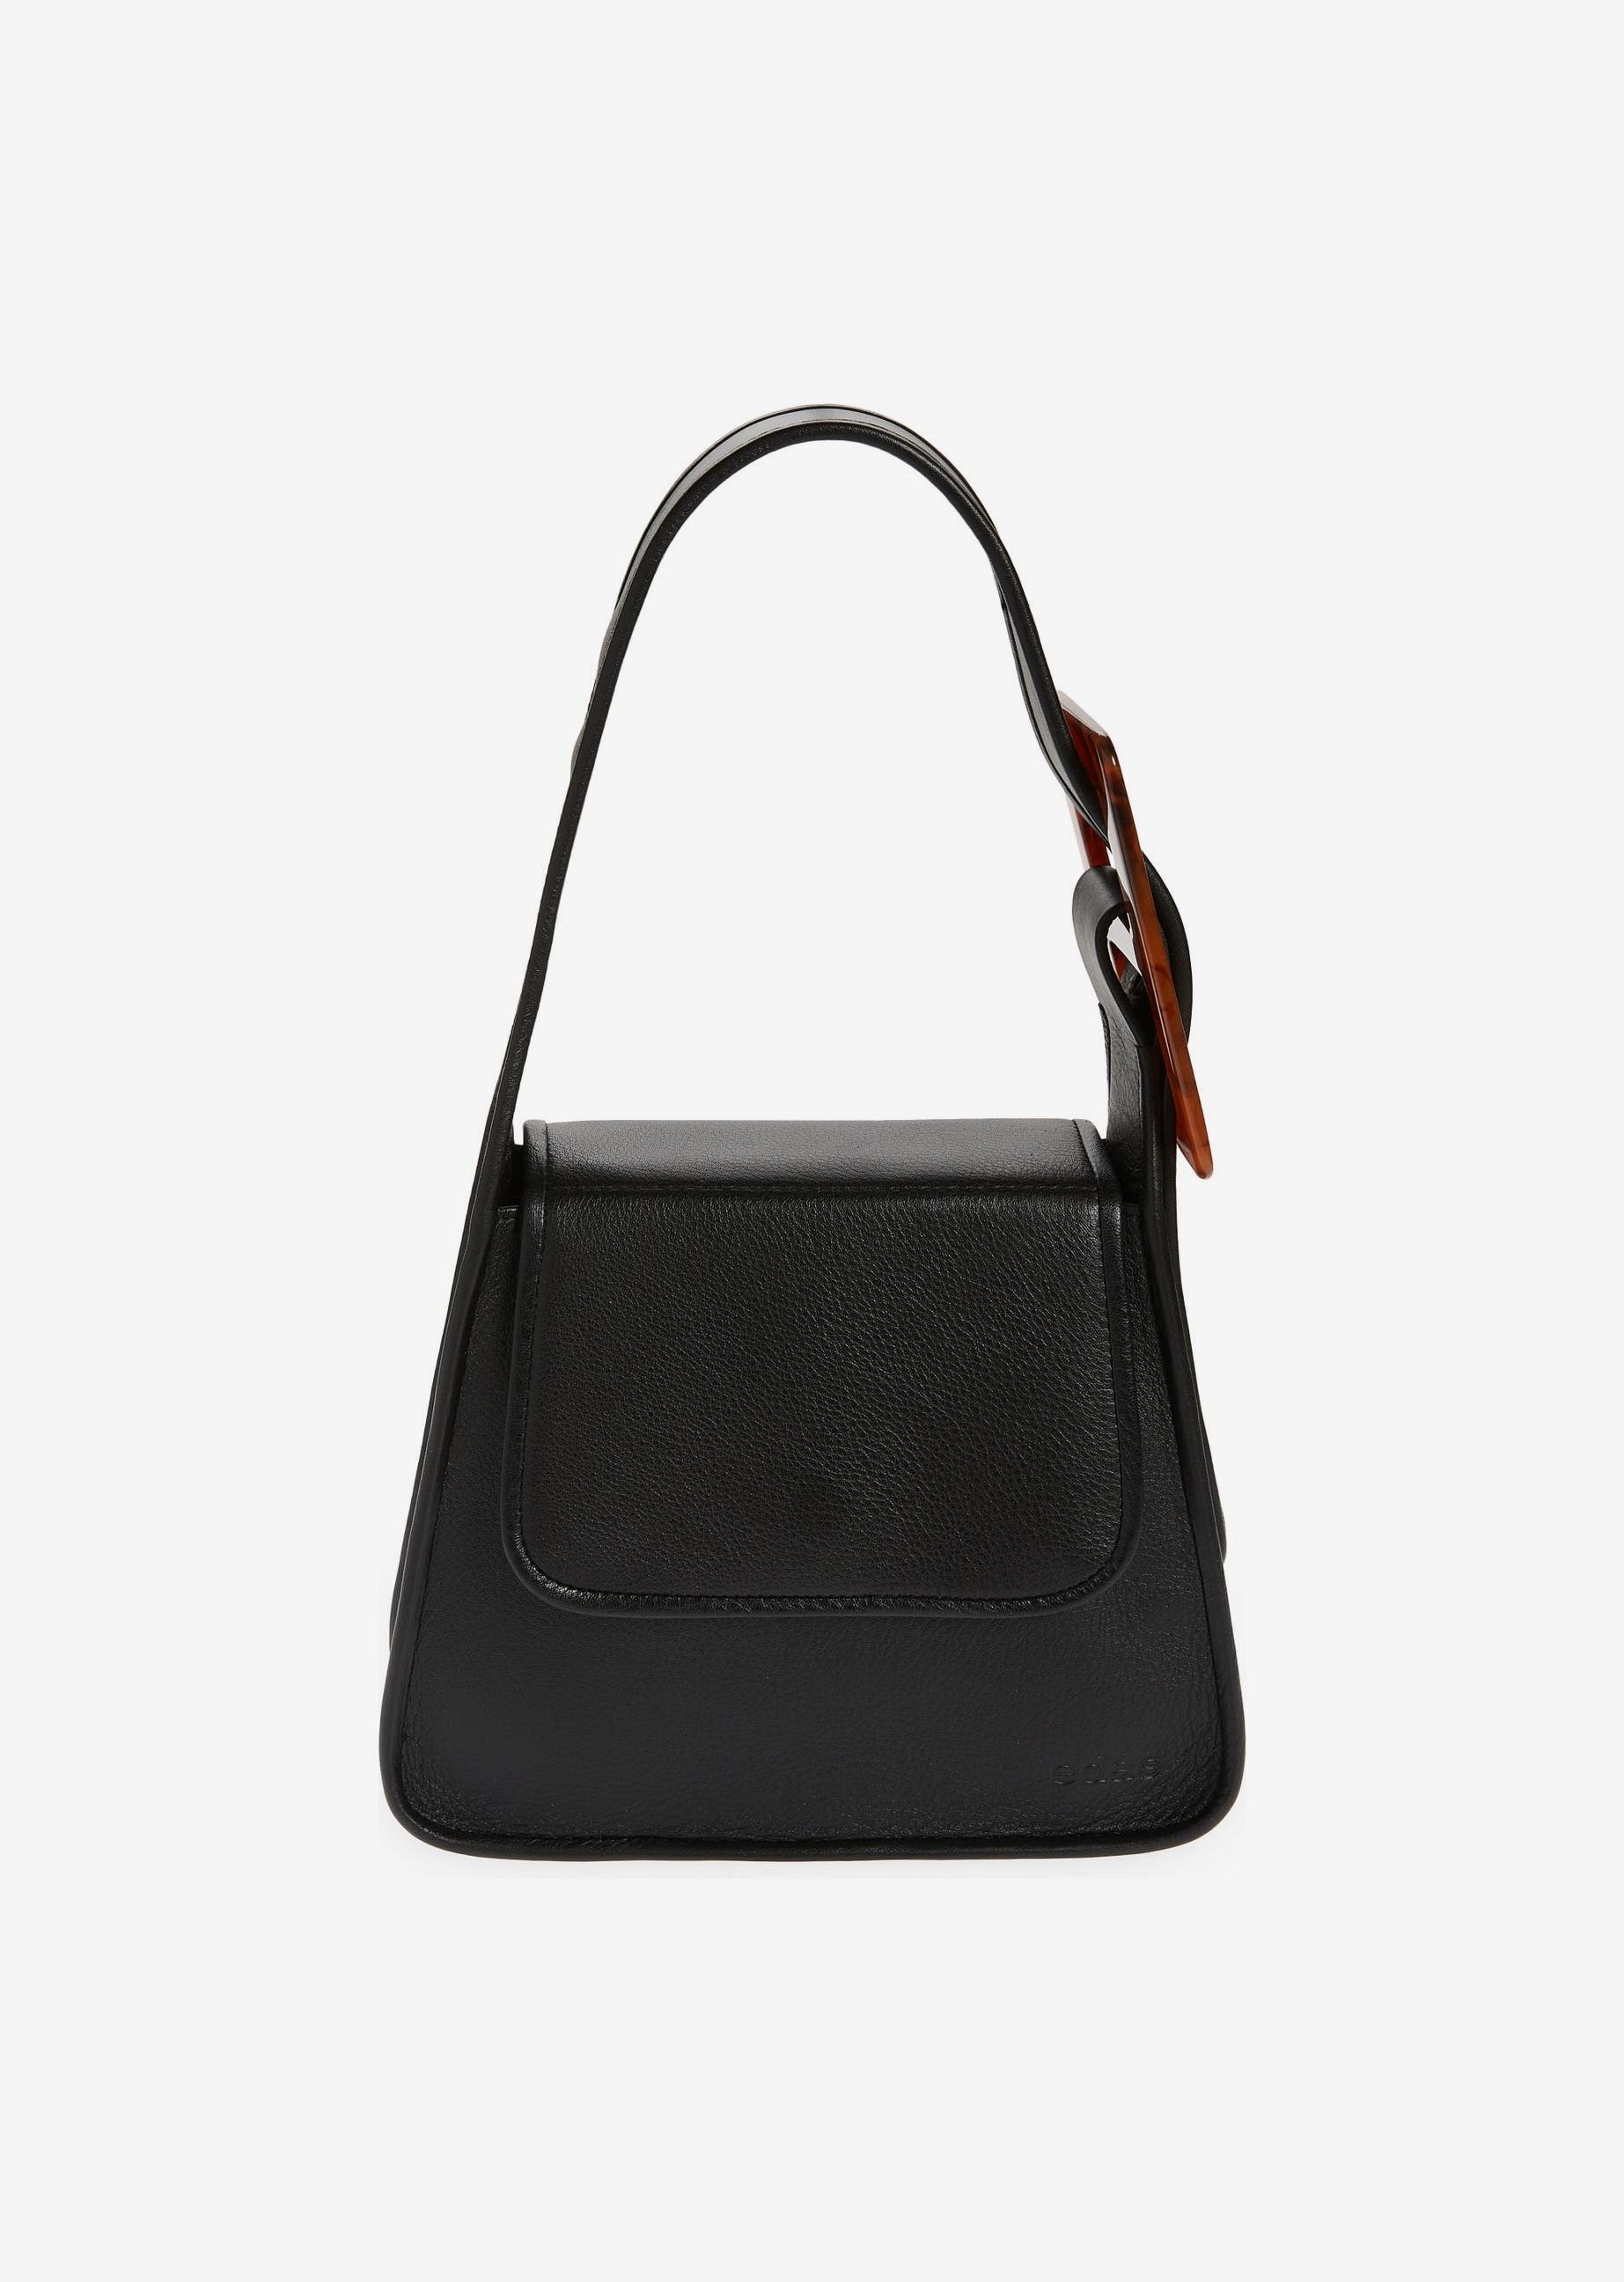 Top Picks for Small Designer Handbags - The A-Lyst: A Boston-based